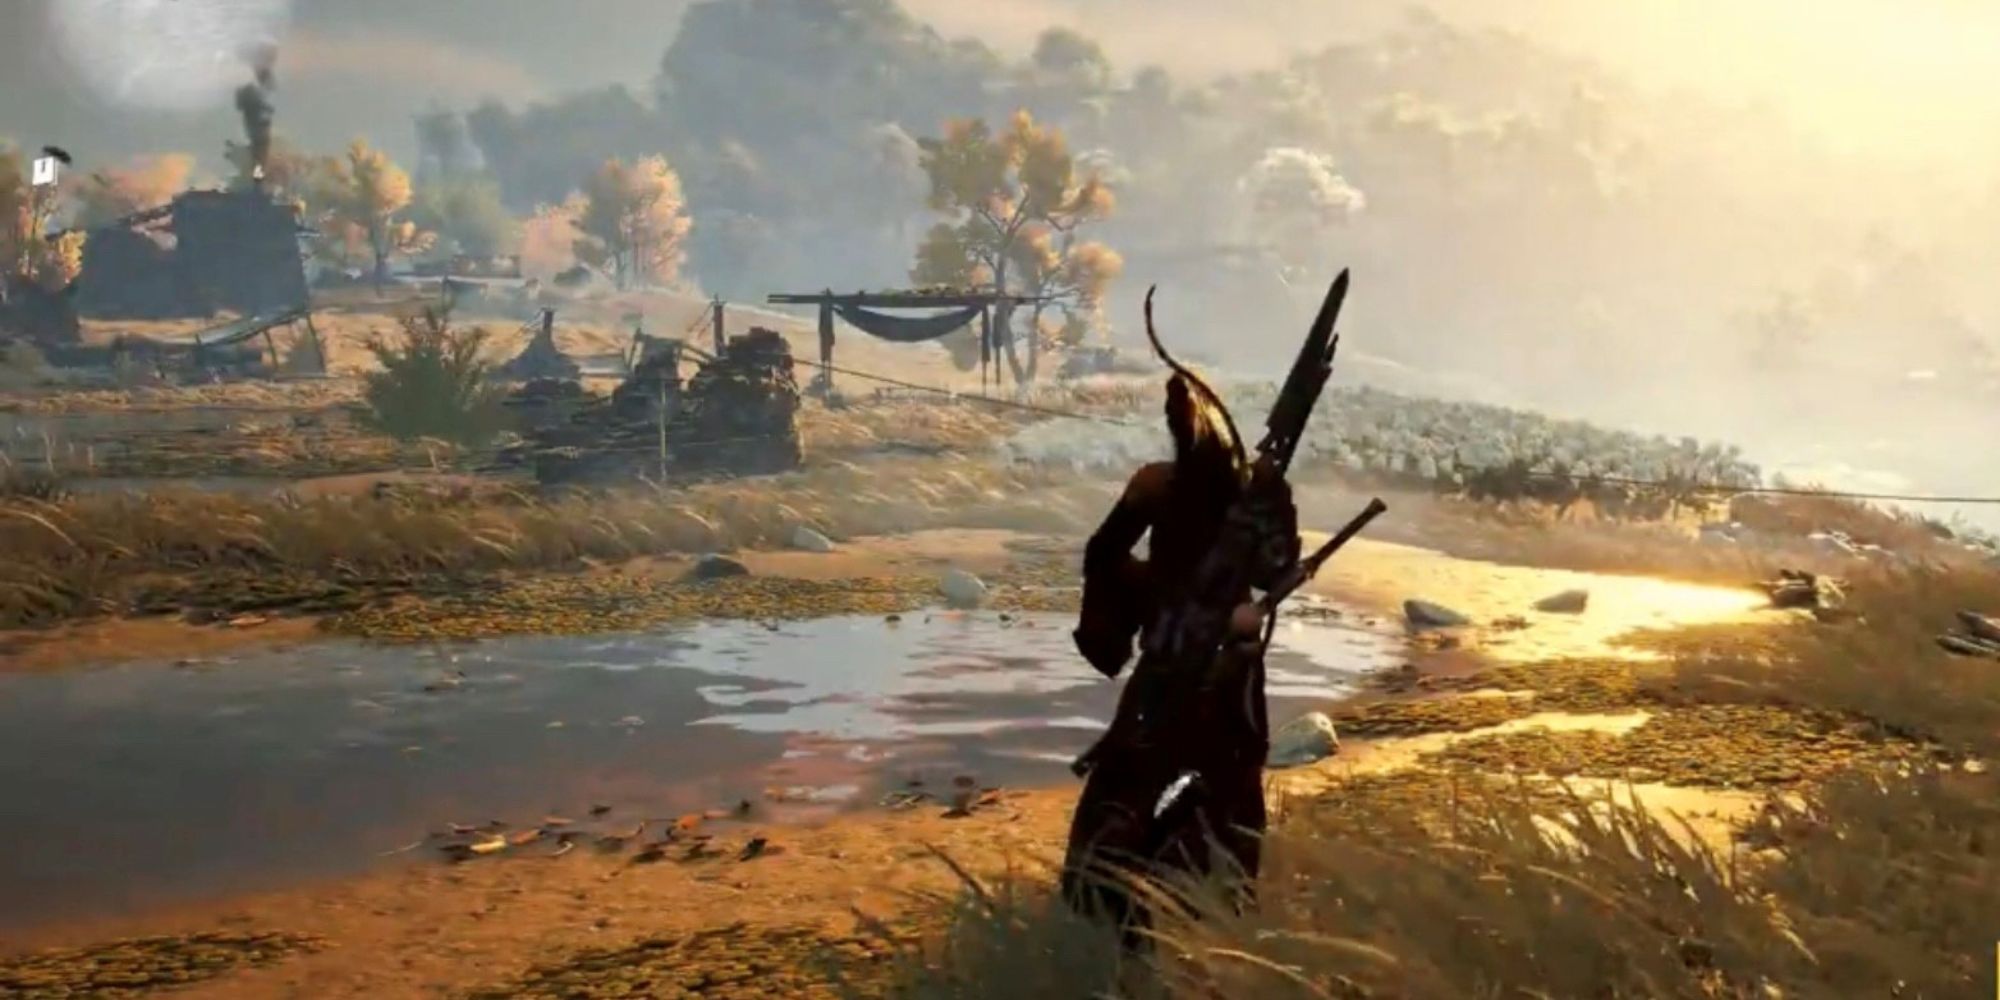 A screenshot showing the player character in a field with a settlement in the background from Where Winds Meet